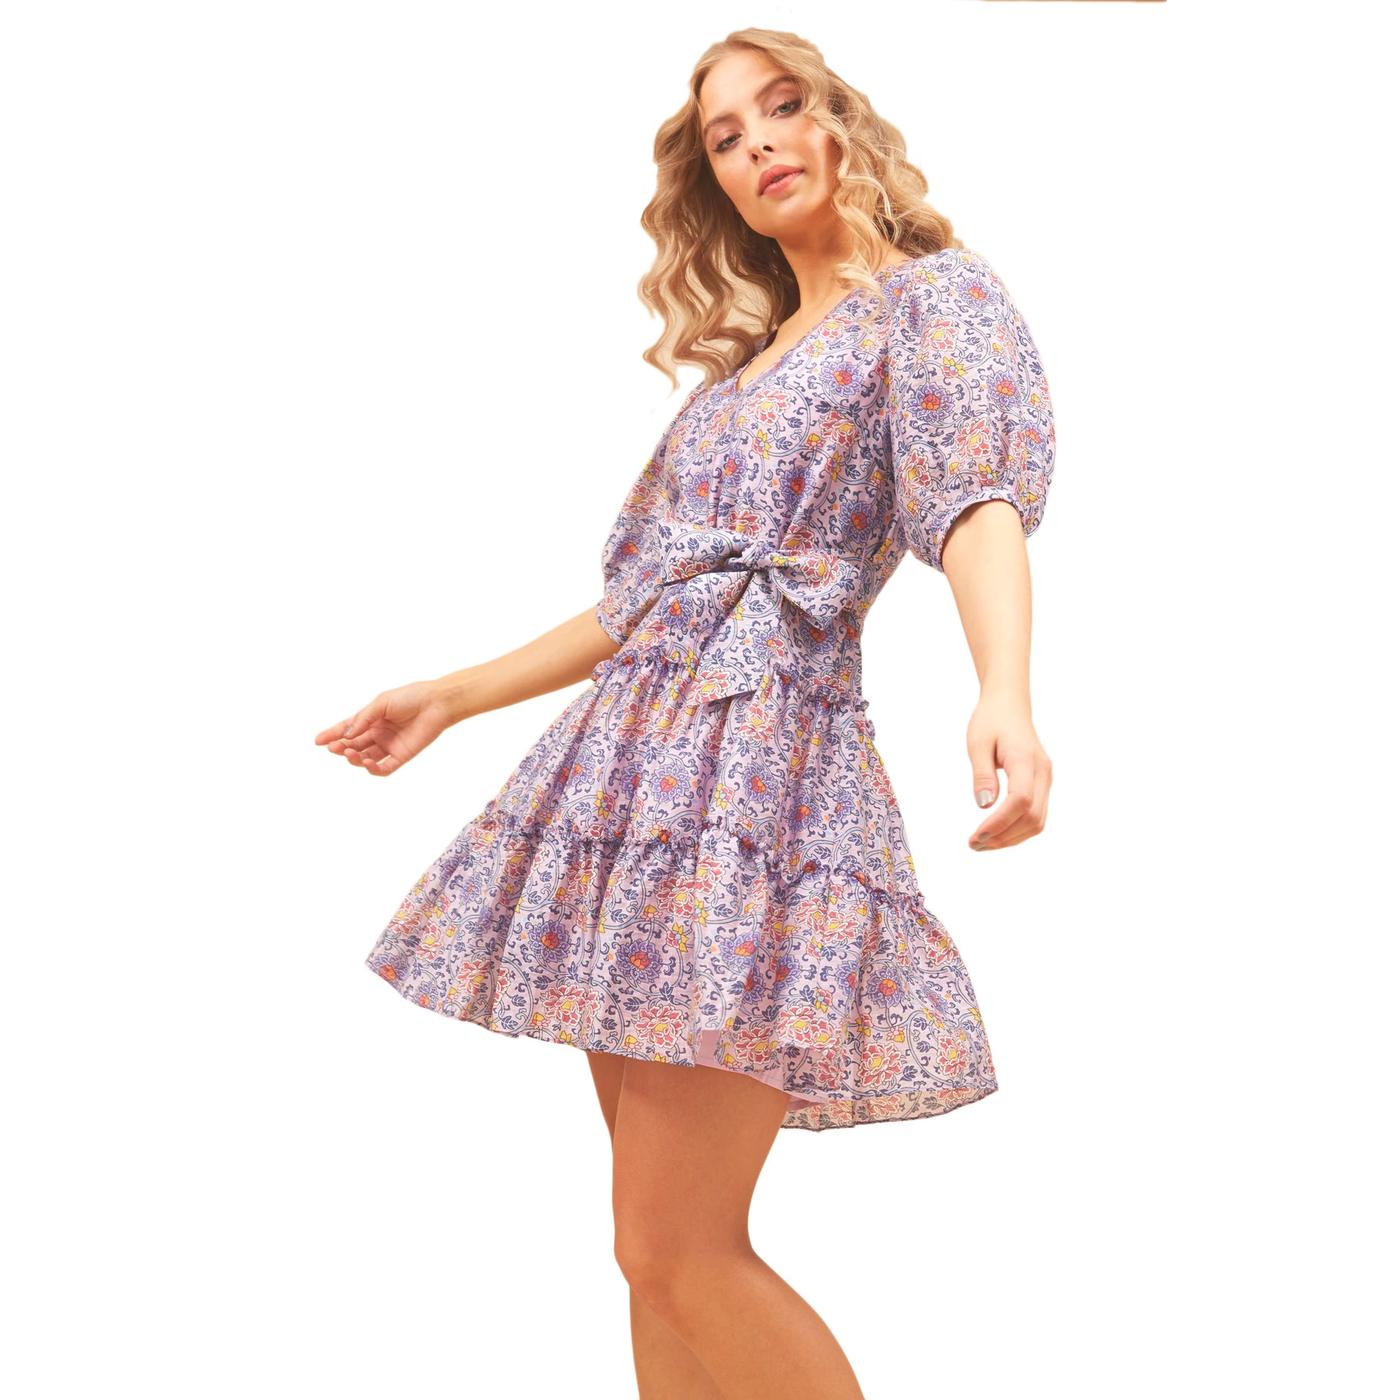 TRAFFIC PEOPLE Felicitous Retro 60s Floaty Floral Mini Dress